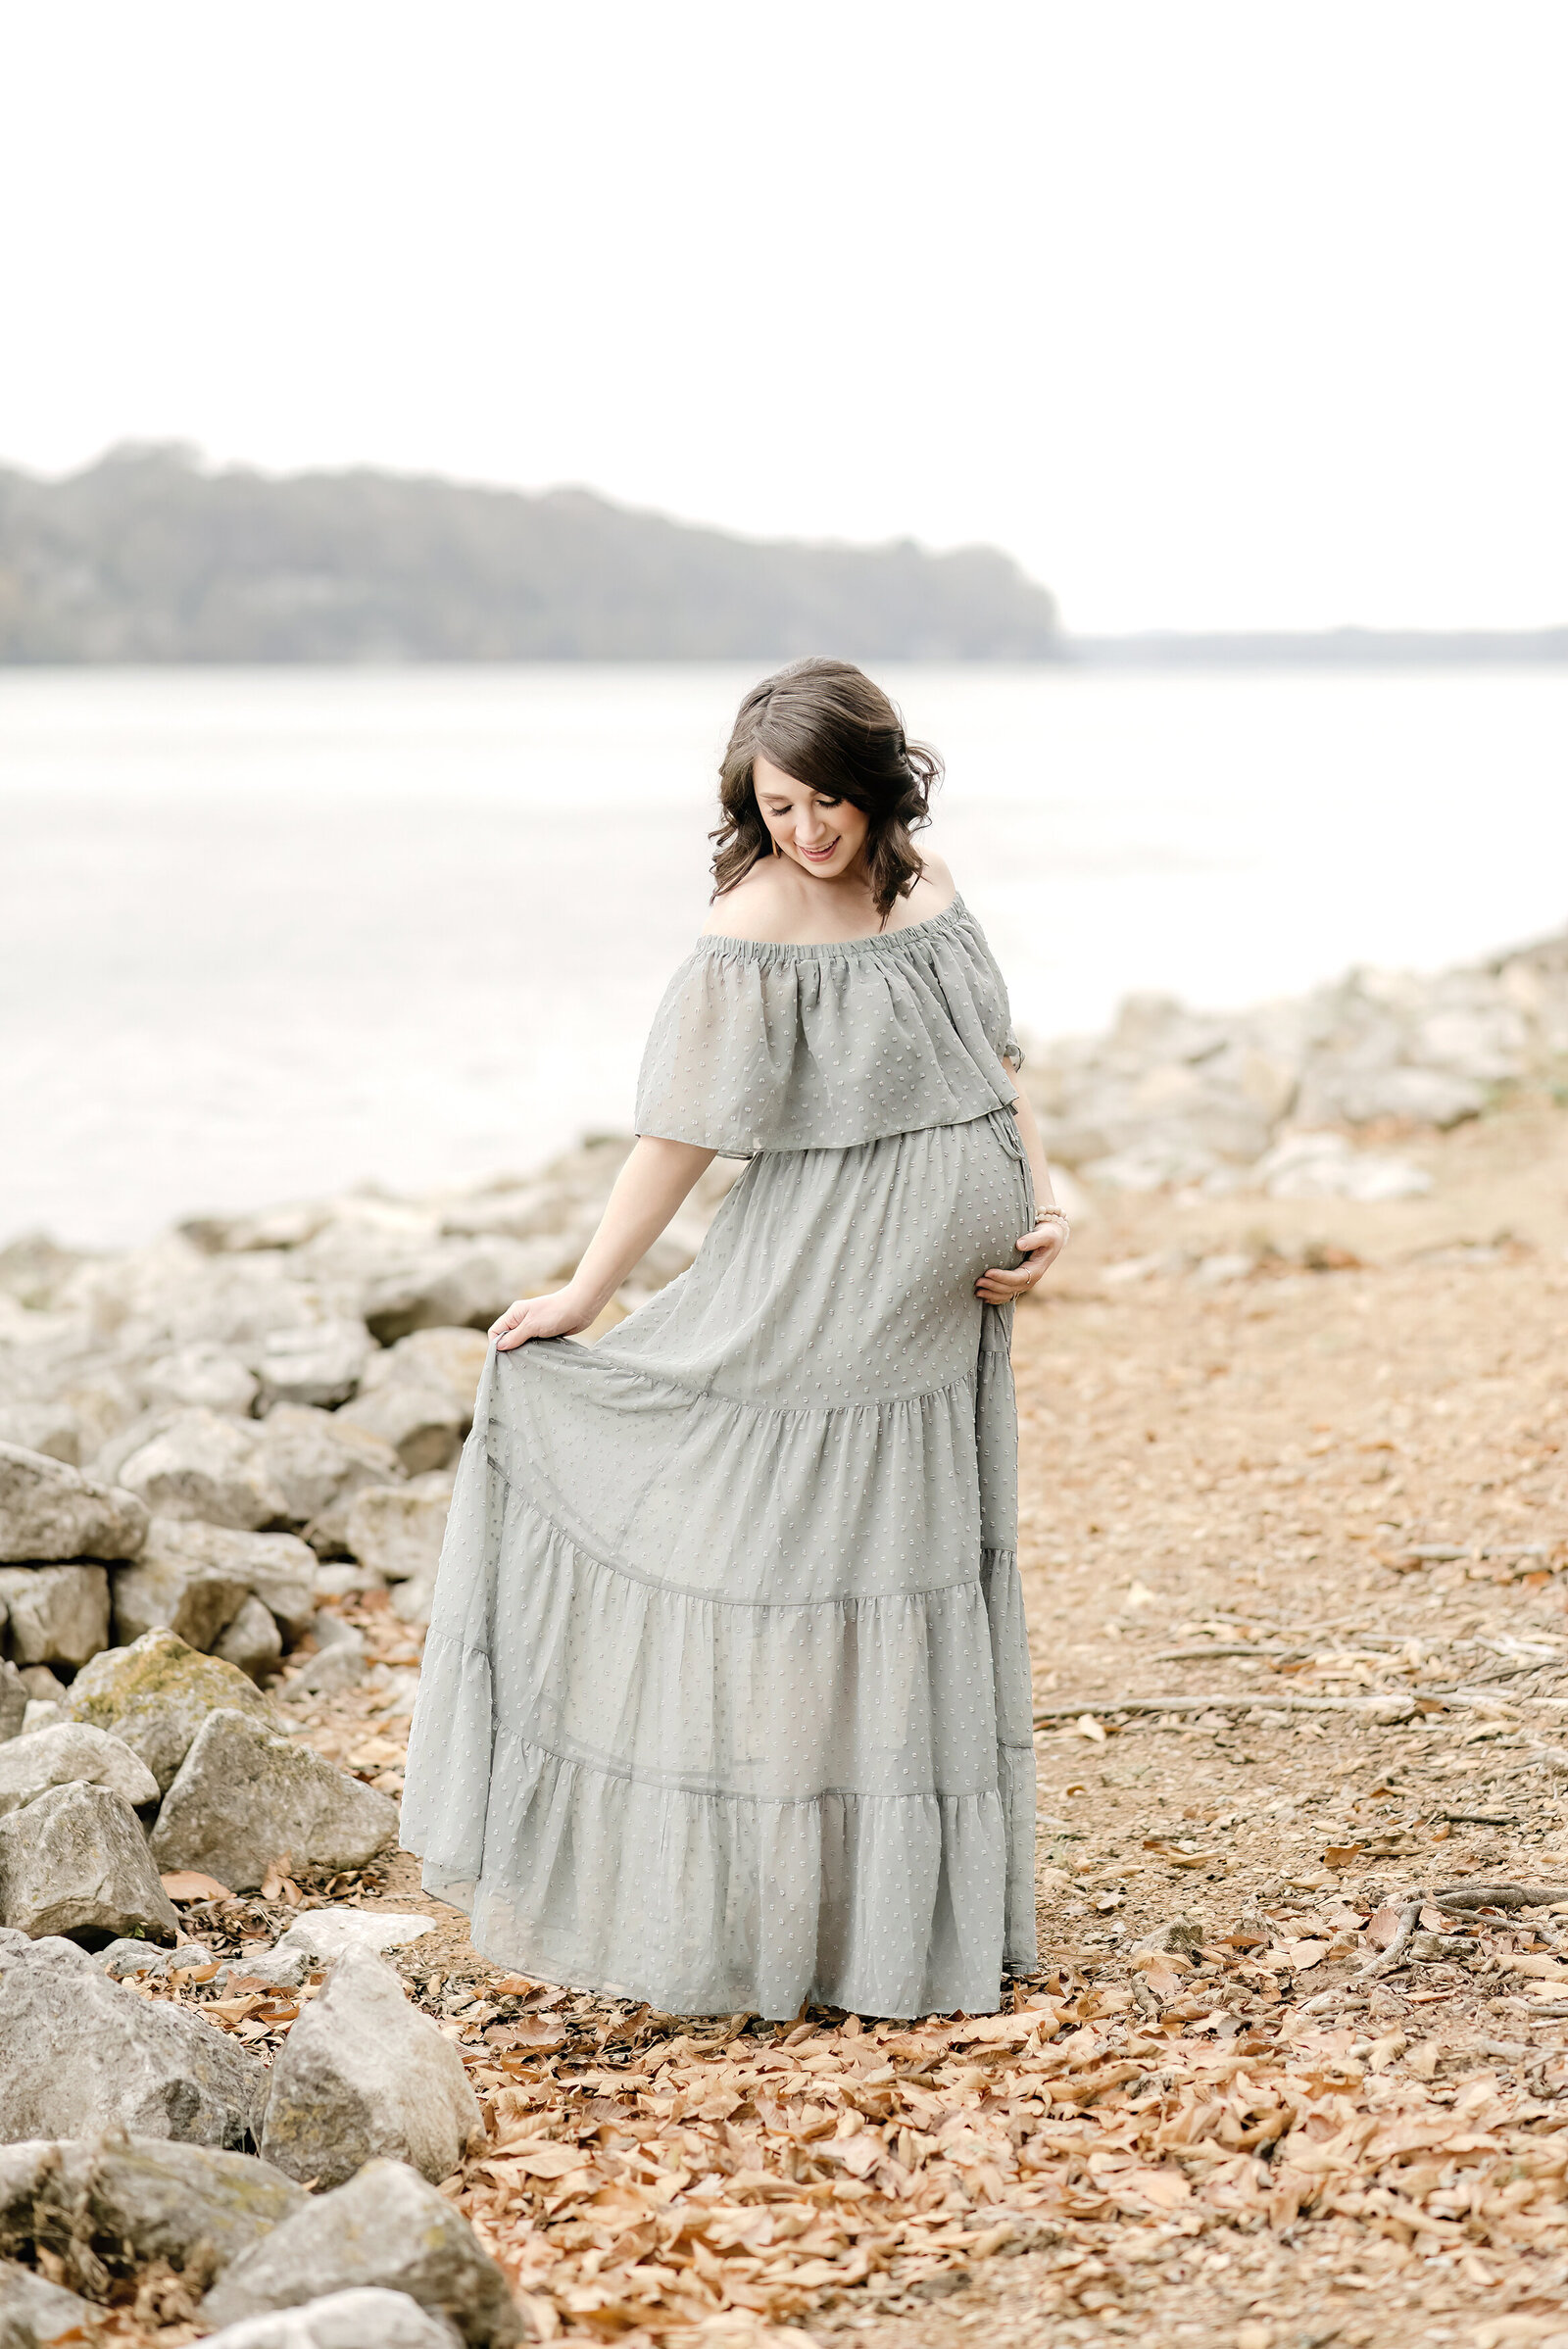 Pregnant woman in teal dress by river and rocks